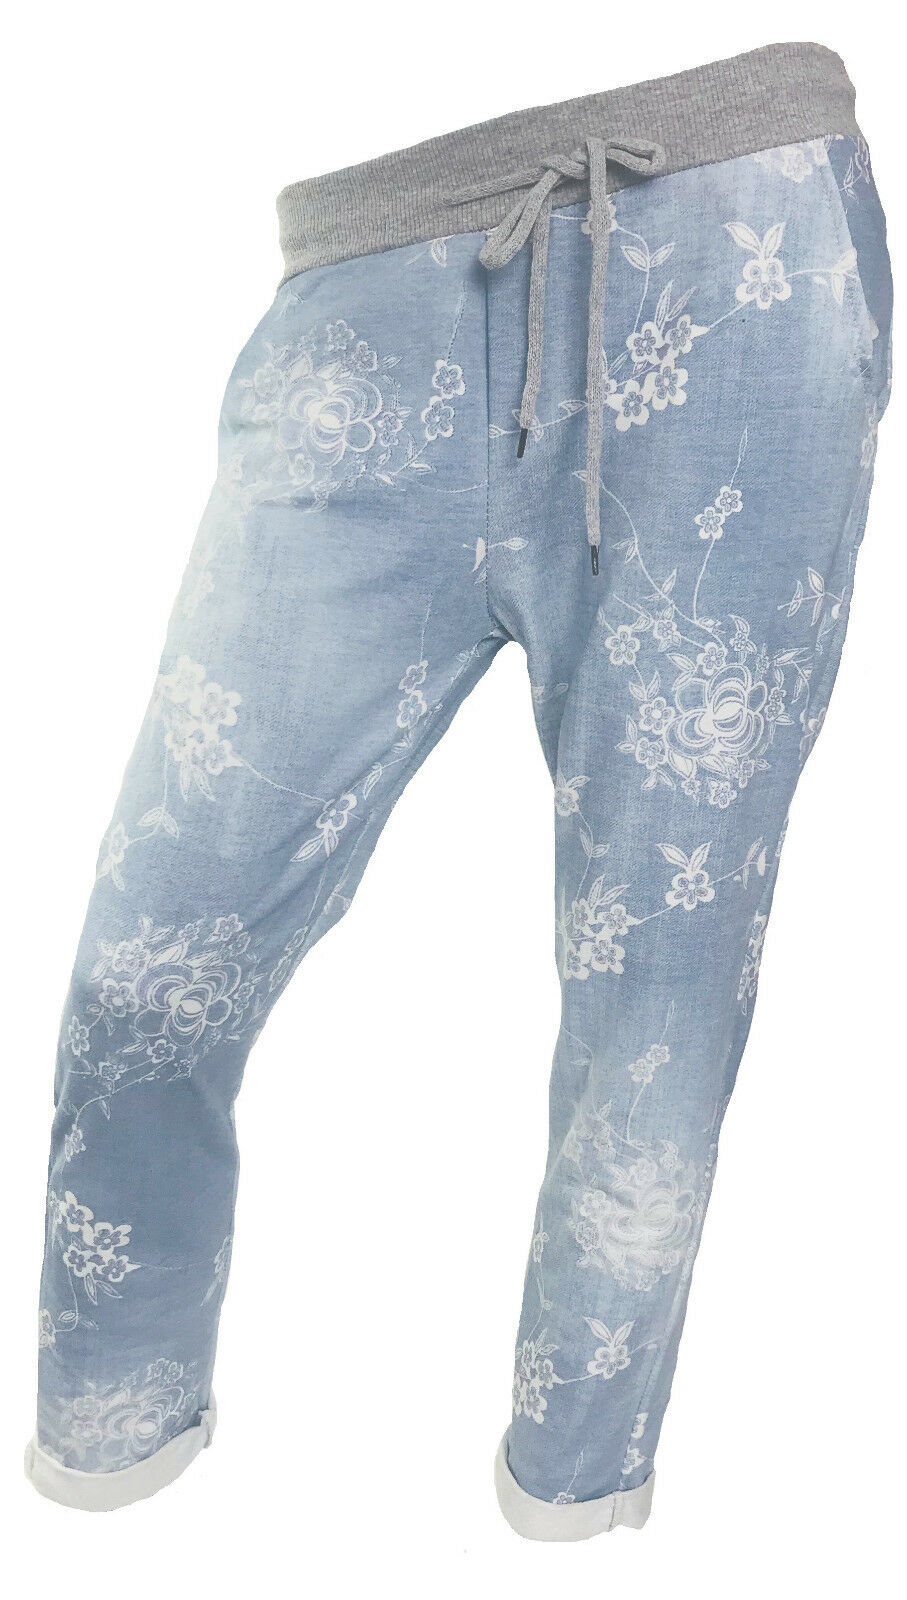 Ladies Italian Light Blue & Floral Denim Cropped pants. Sizes 8-14, 16-18 Available.